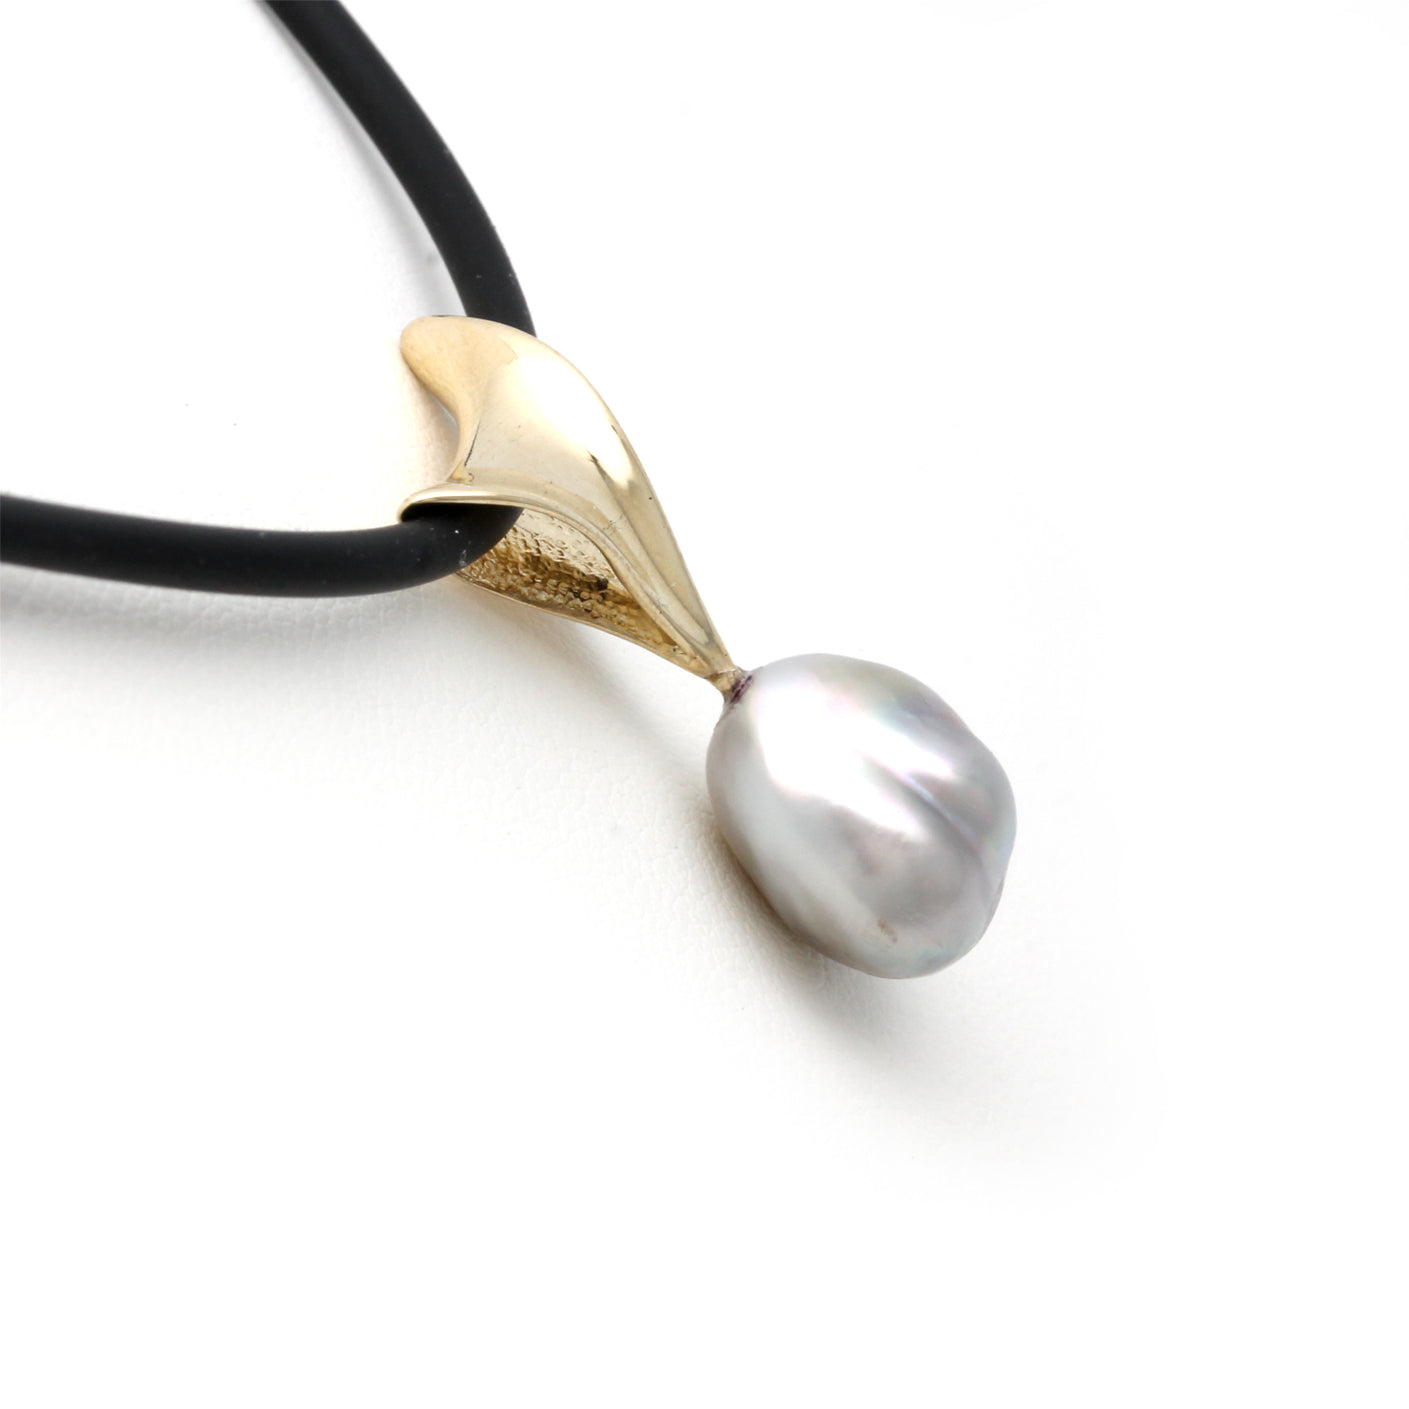 Huge and Iridescent Cortez Pearl on "Ventus" 14K Yellow Gold Pendant